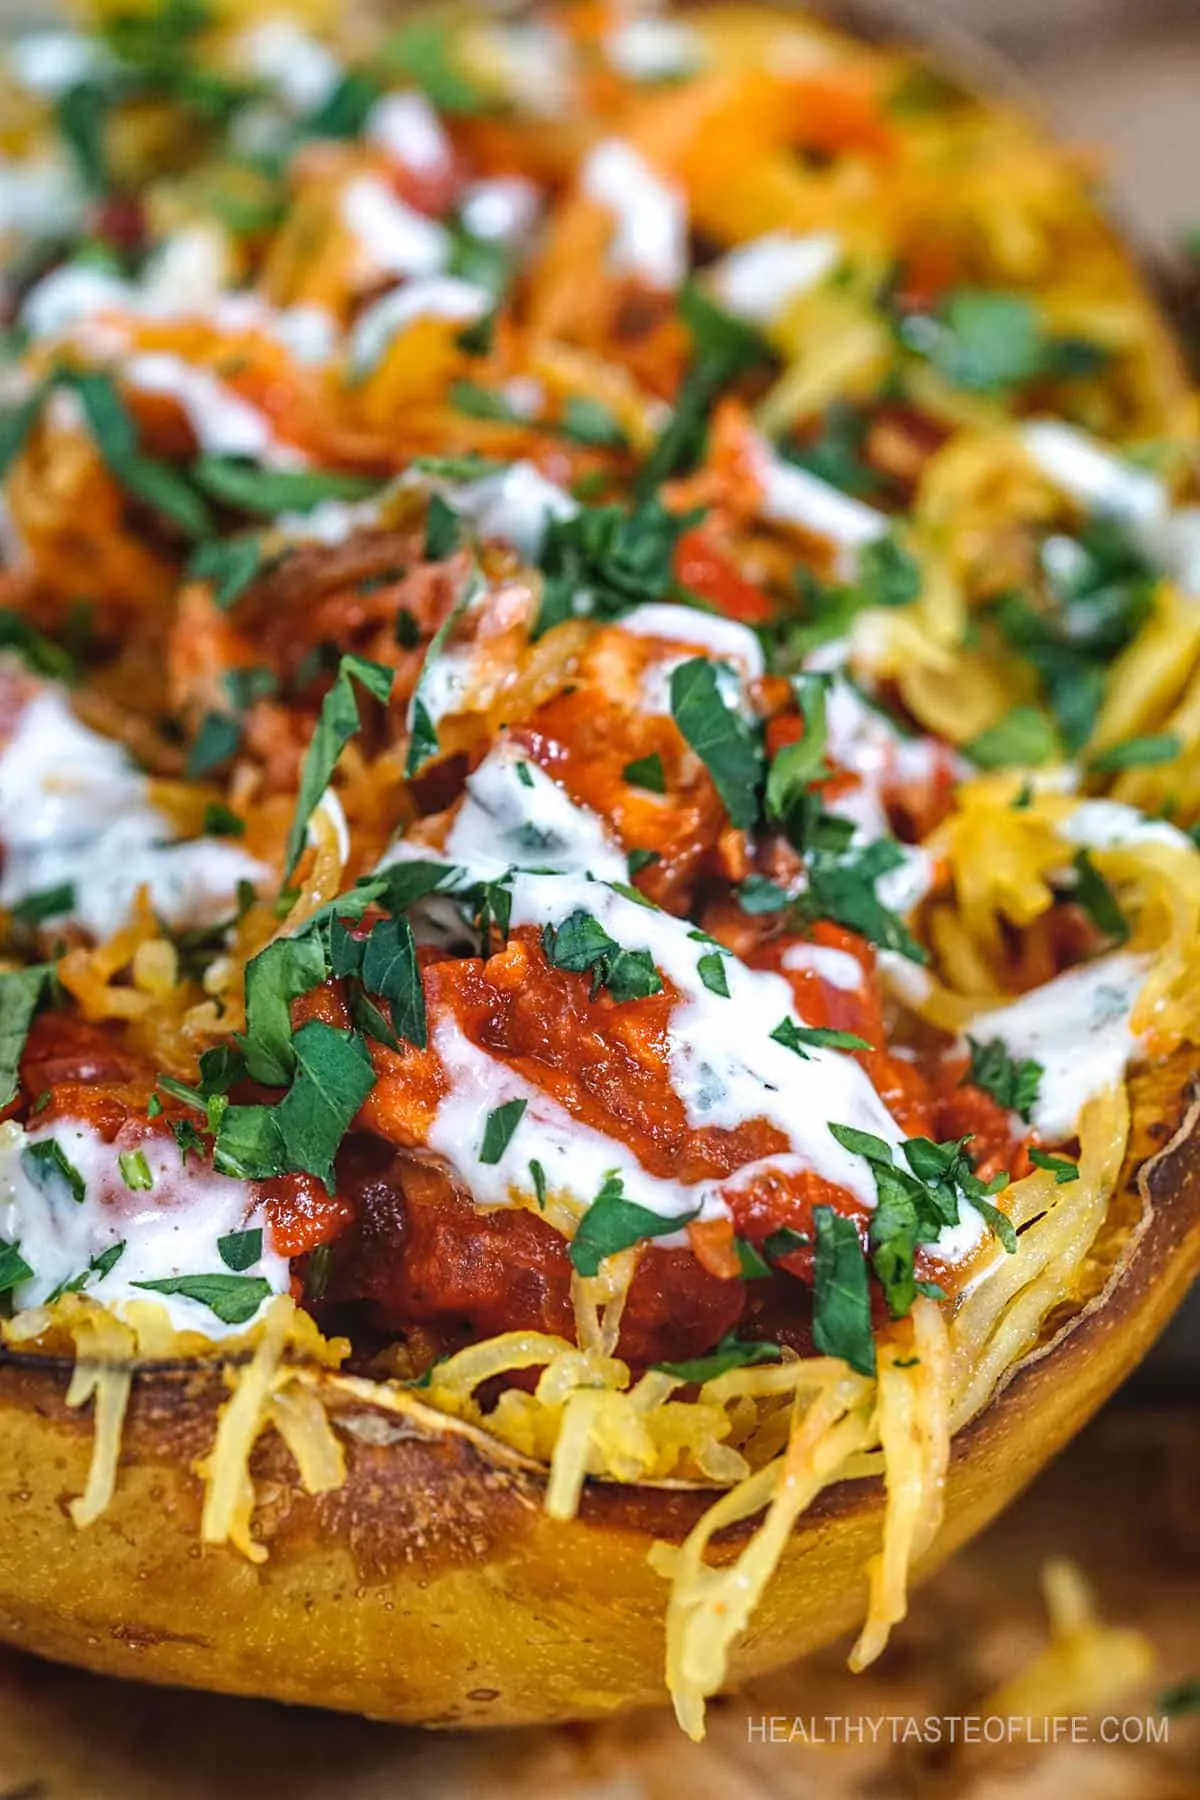 Looking for paleo spaghetti squash recipes with chicken? Try this paleo chicken and spaghetti squash boats loaded with wholesome ingredients and tossed in a flavorful paleo friendly BBQ sauce a delicious lunch or dinner made with only whole foods! Customize the recipe and pair the paleo spaghetti squash boats with other sauces, meats, seafood or transform into a casserole. #paleospaghettisquash #paleodinner #paleolunch #paleochicken